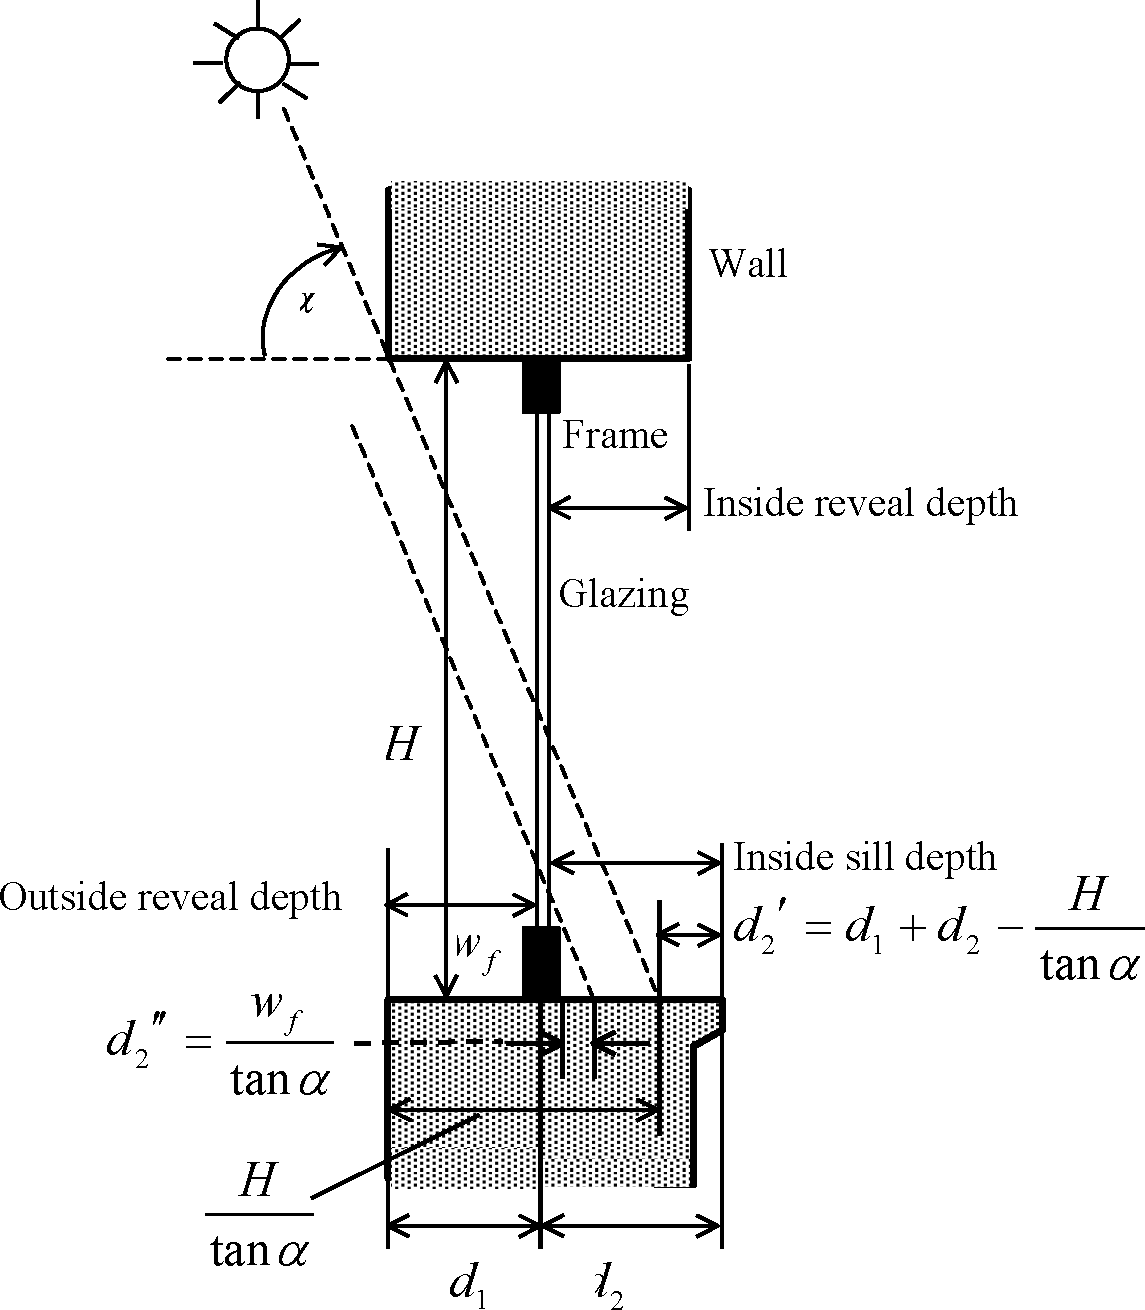 Vertical section through a vertical window with outside and inside reveal showing calculation of the shadows cast by the top reveal onto the inside sill and by the frame onto the inside sill. [fig:vertical-section-through-a-vertical-window]